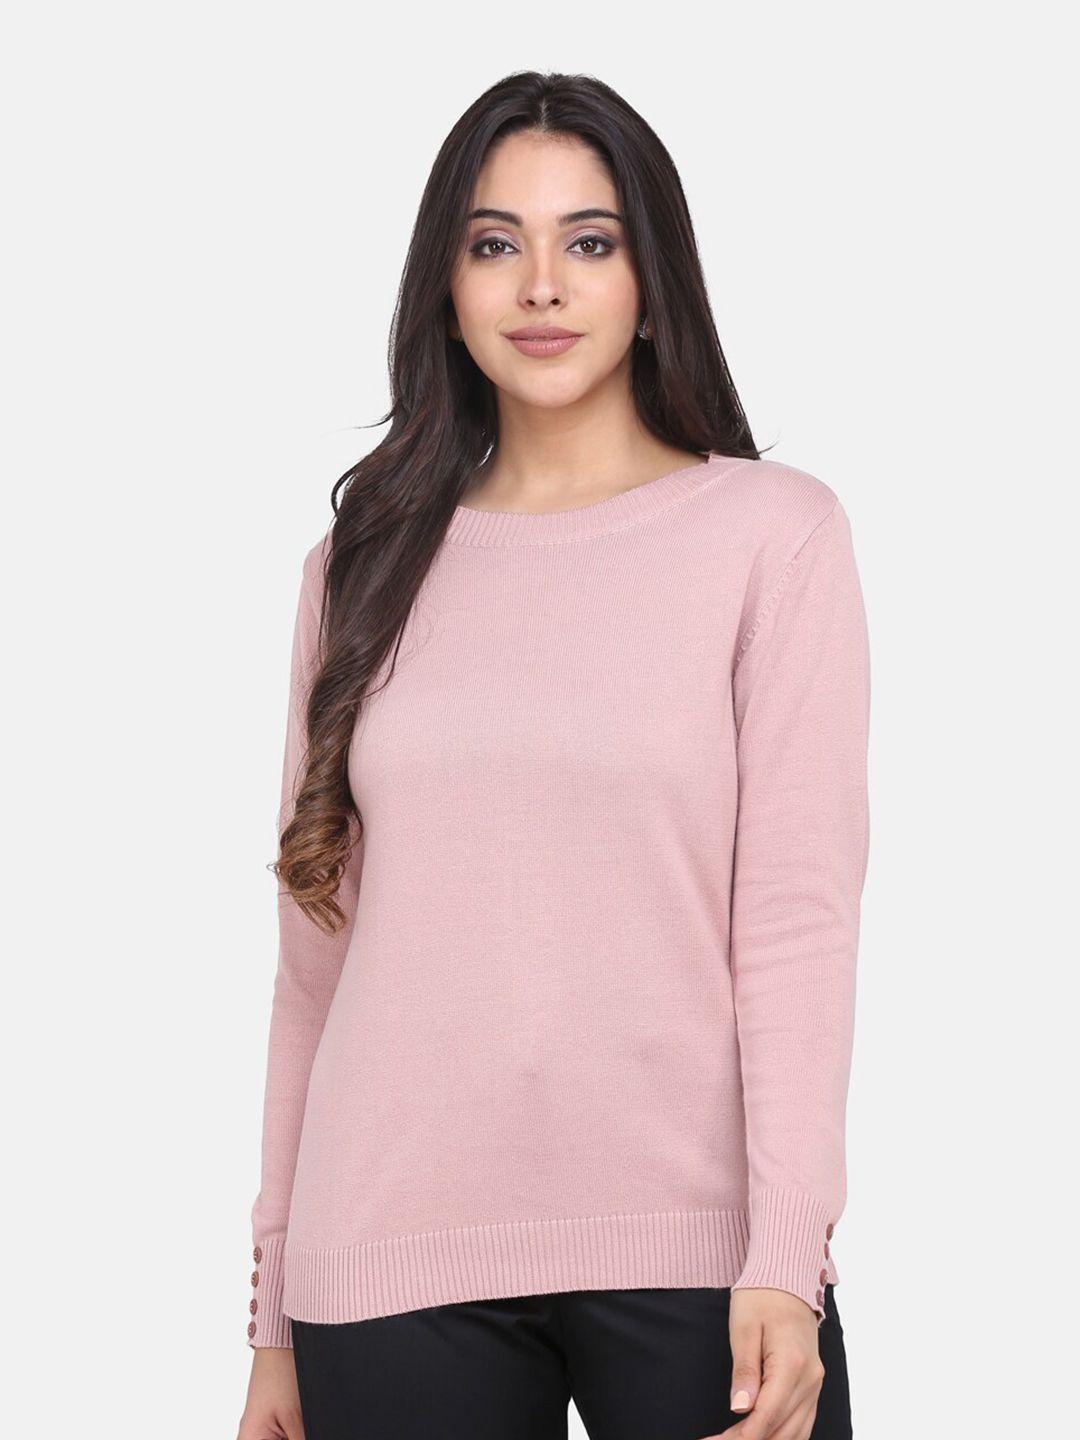 powersutra women pink solid full sleeve cotton pullover